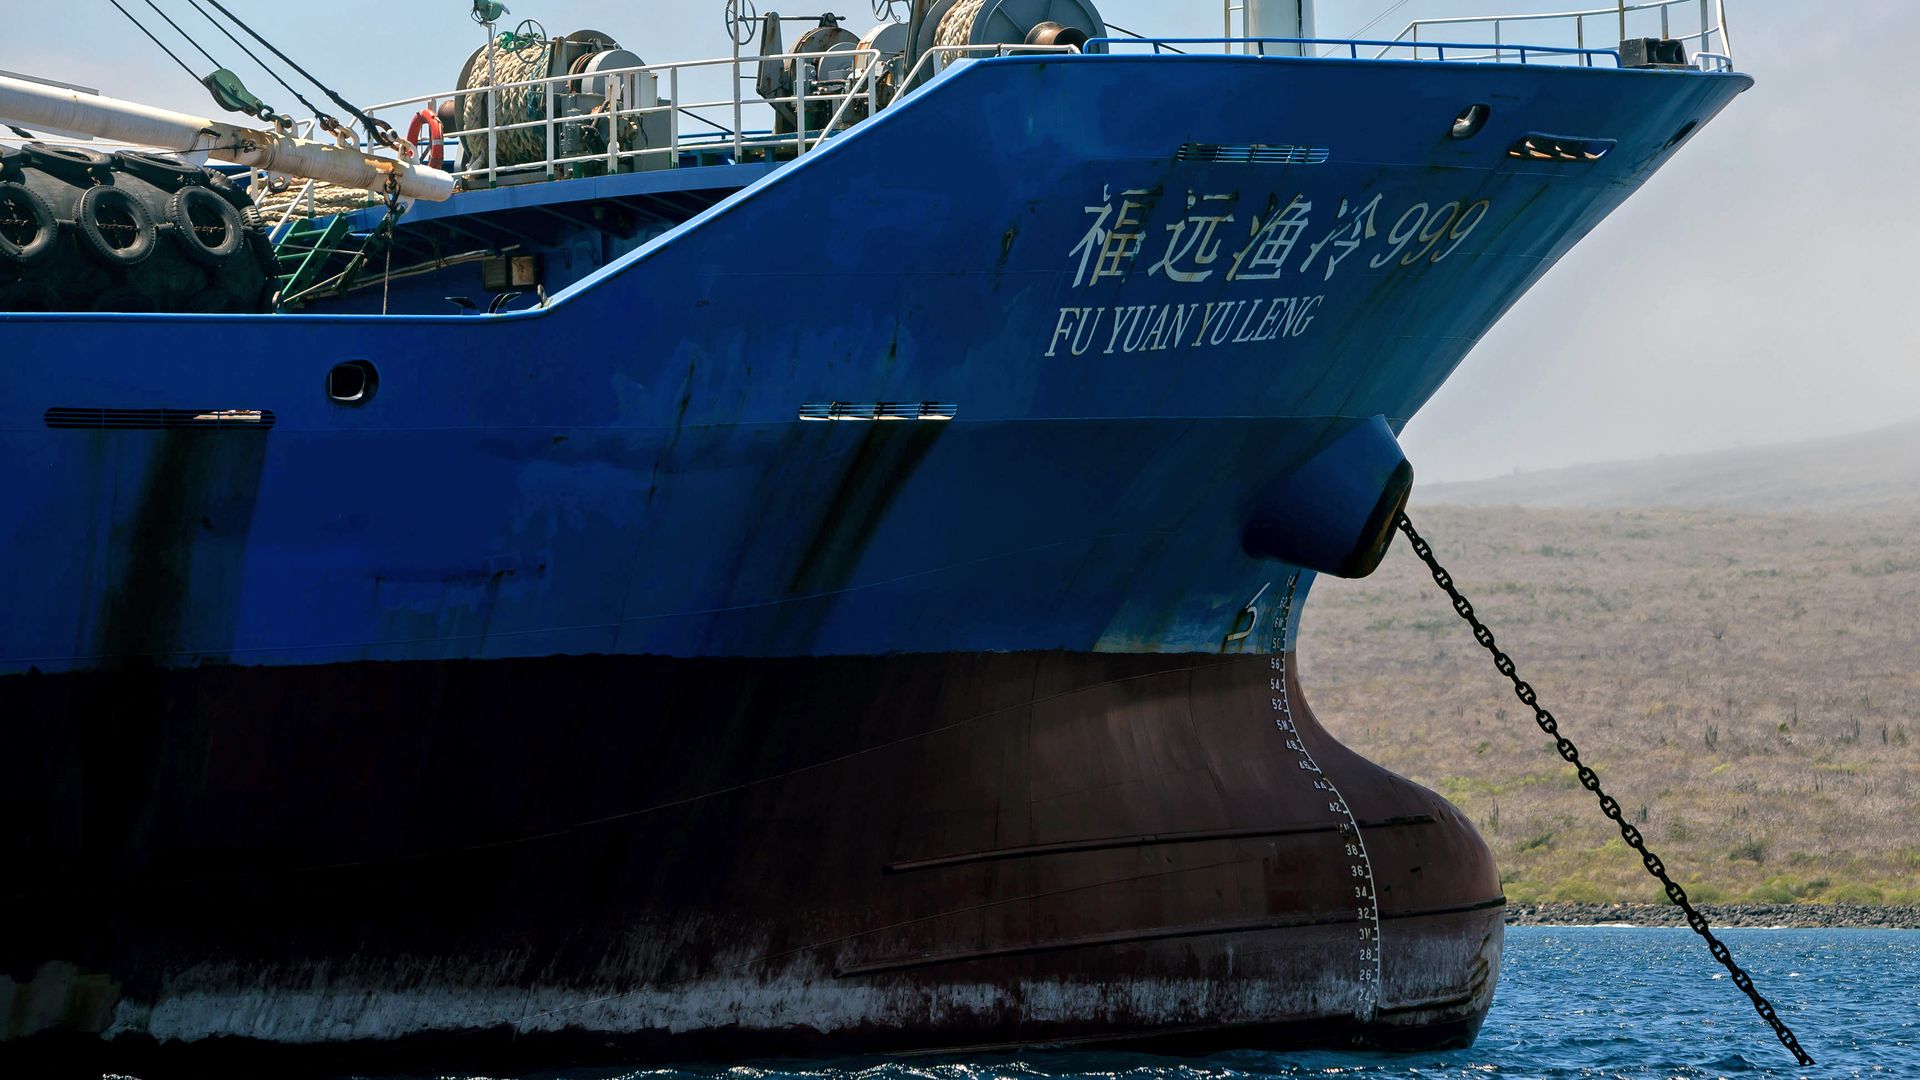 A Chinese vessel confiscated by the Ecuadorean Navy is shown.